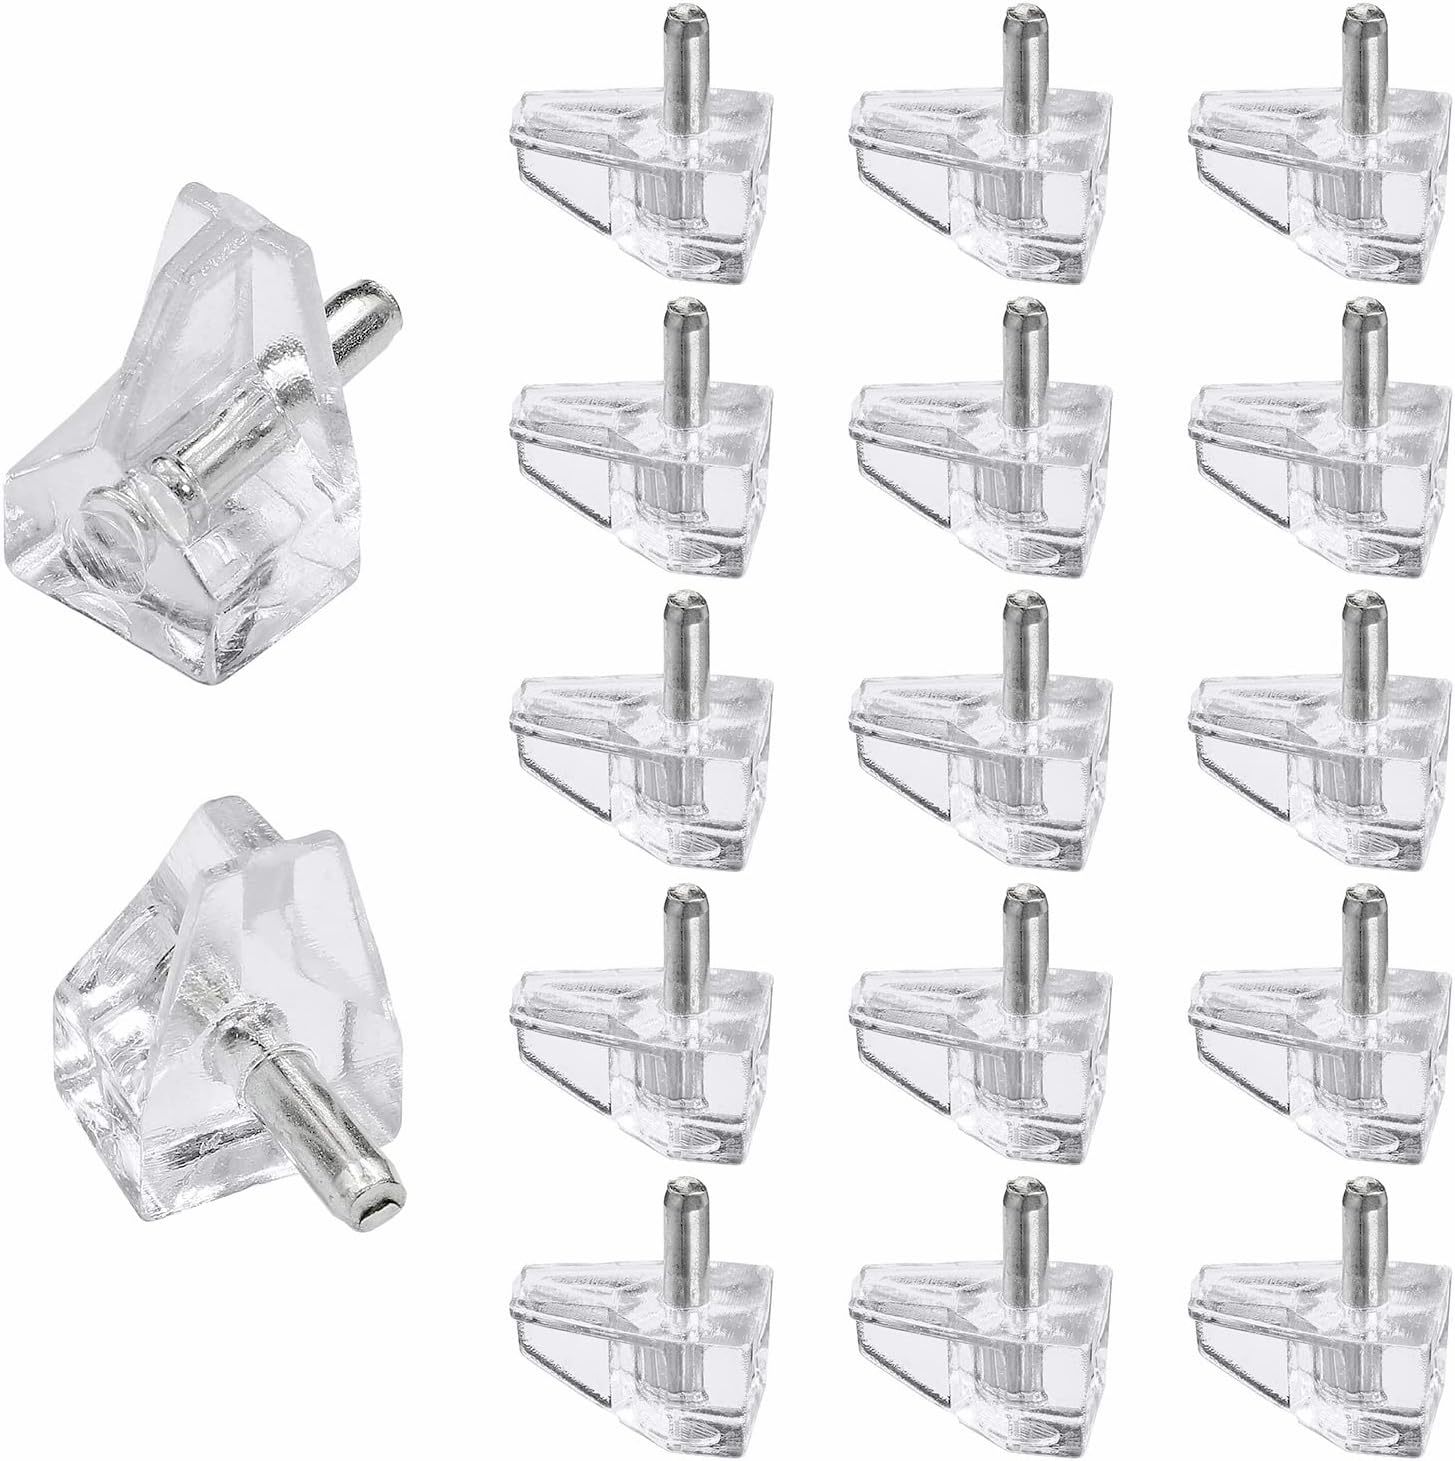 Jamiikury 20pcs Clear Shelf Pegs, 3mm Plastic Shelf Pins Small Shelf  Support Pins, Cabinet Shelf Clips for Cabinets Bookcase Shelves Cupb